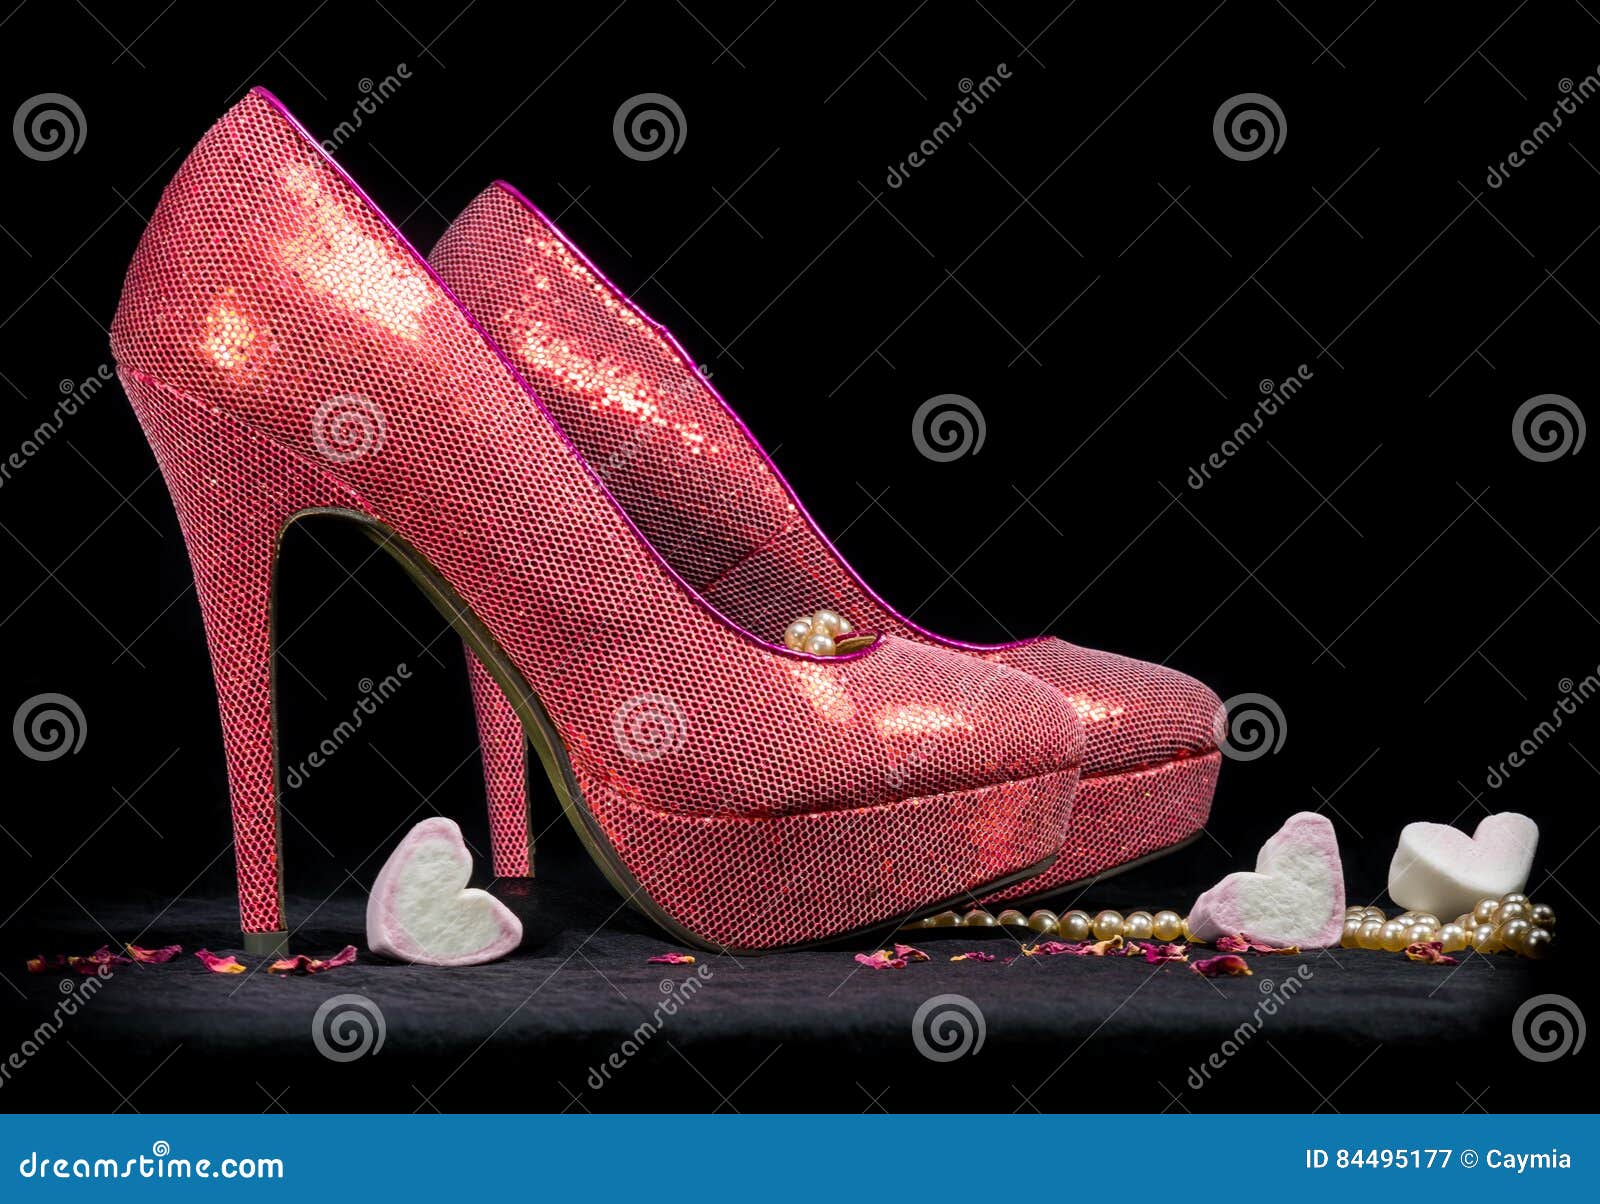 Pink High Heel Shoes on Black Background. Stock Image - Image of copy ...